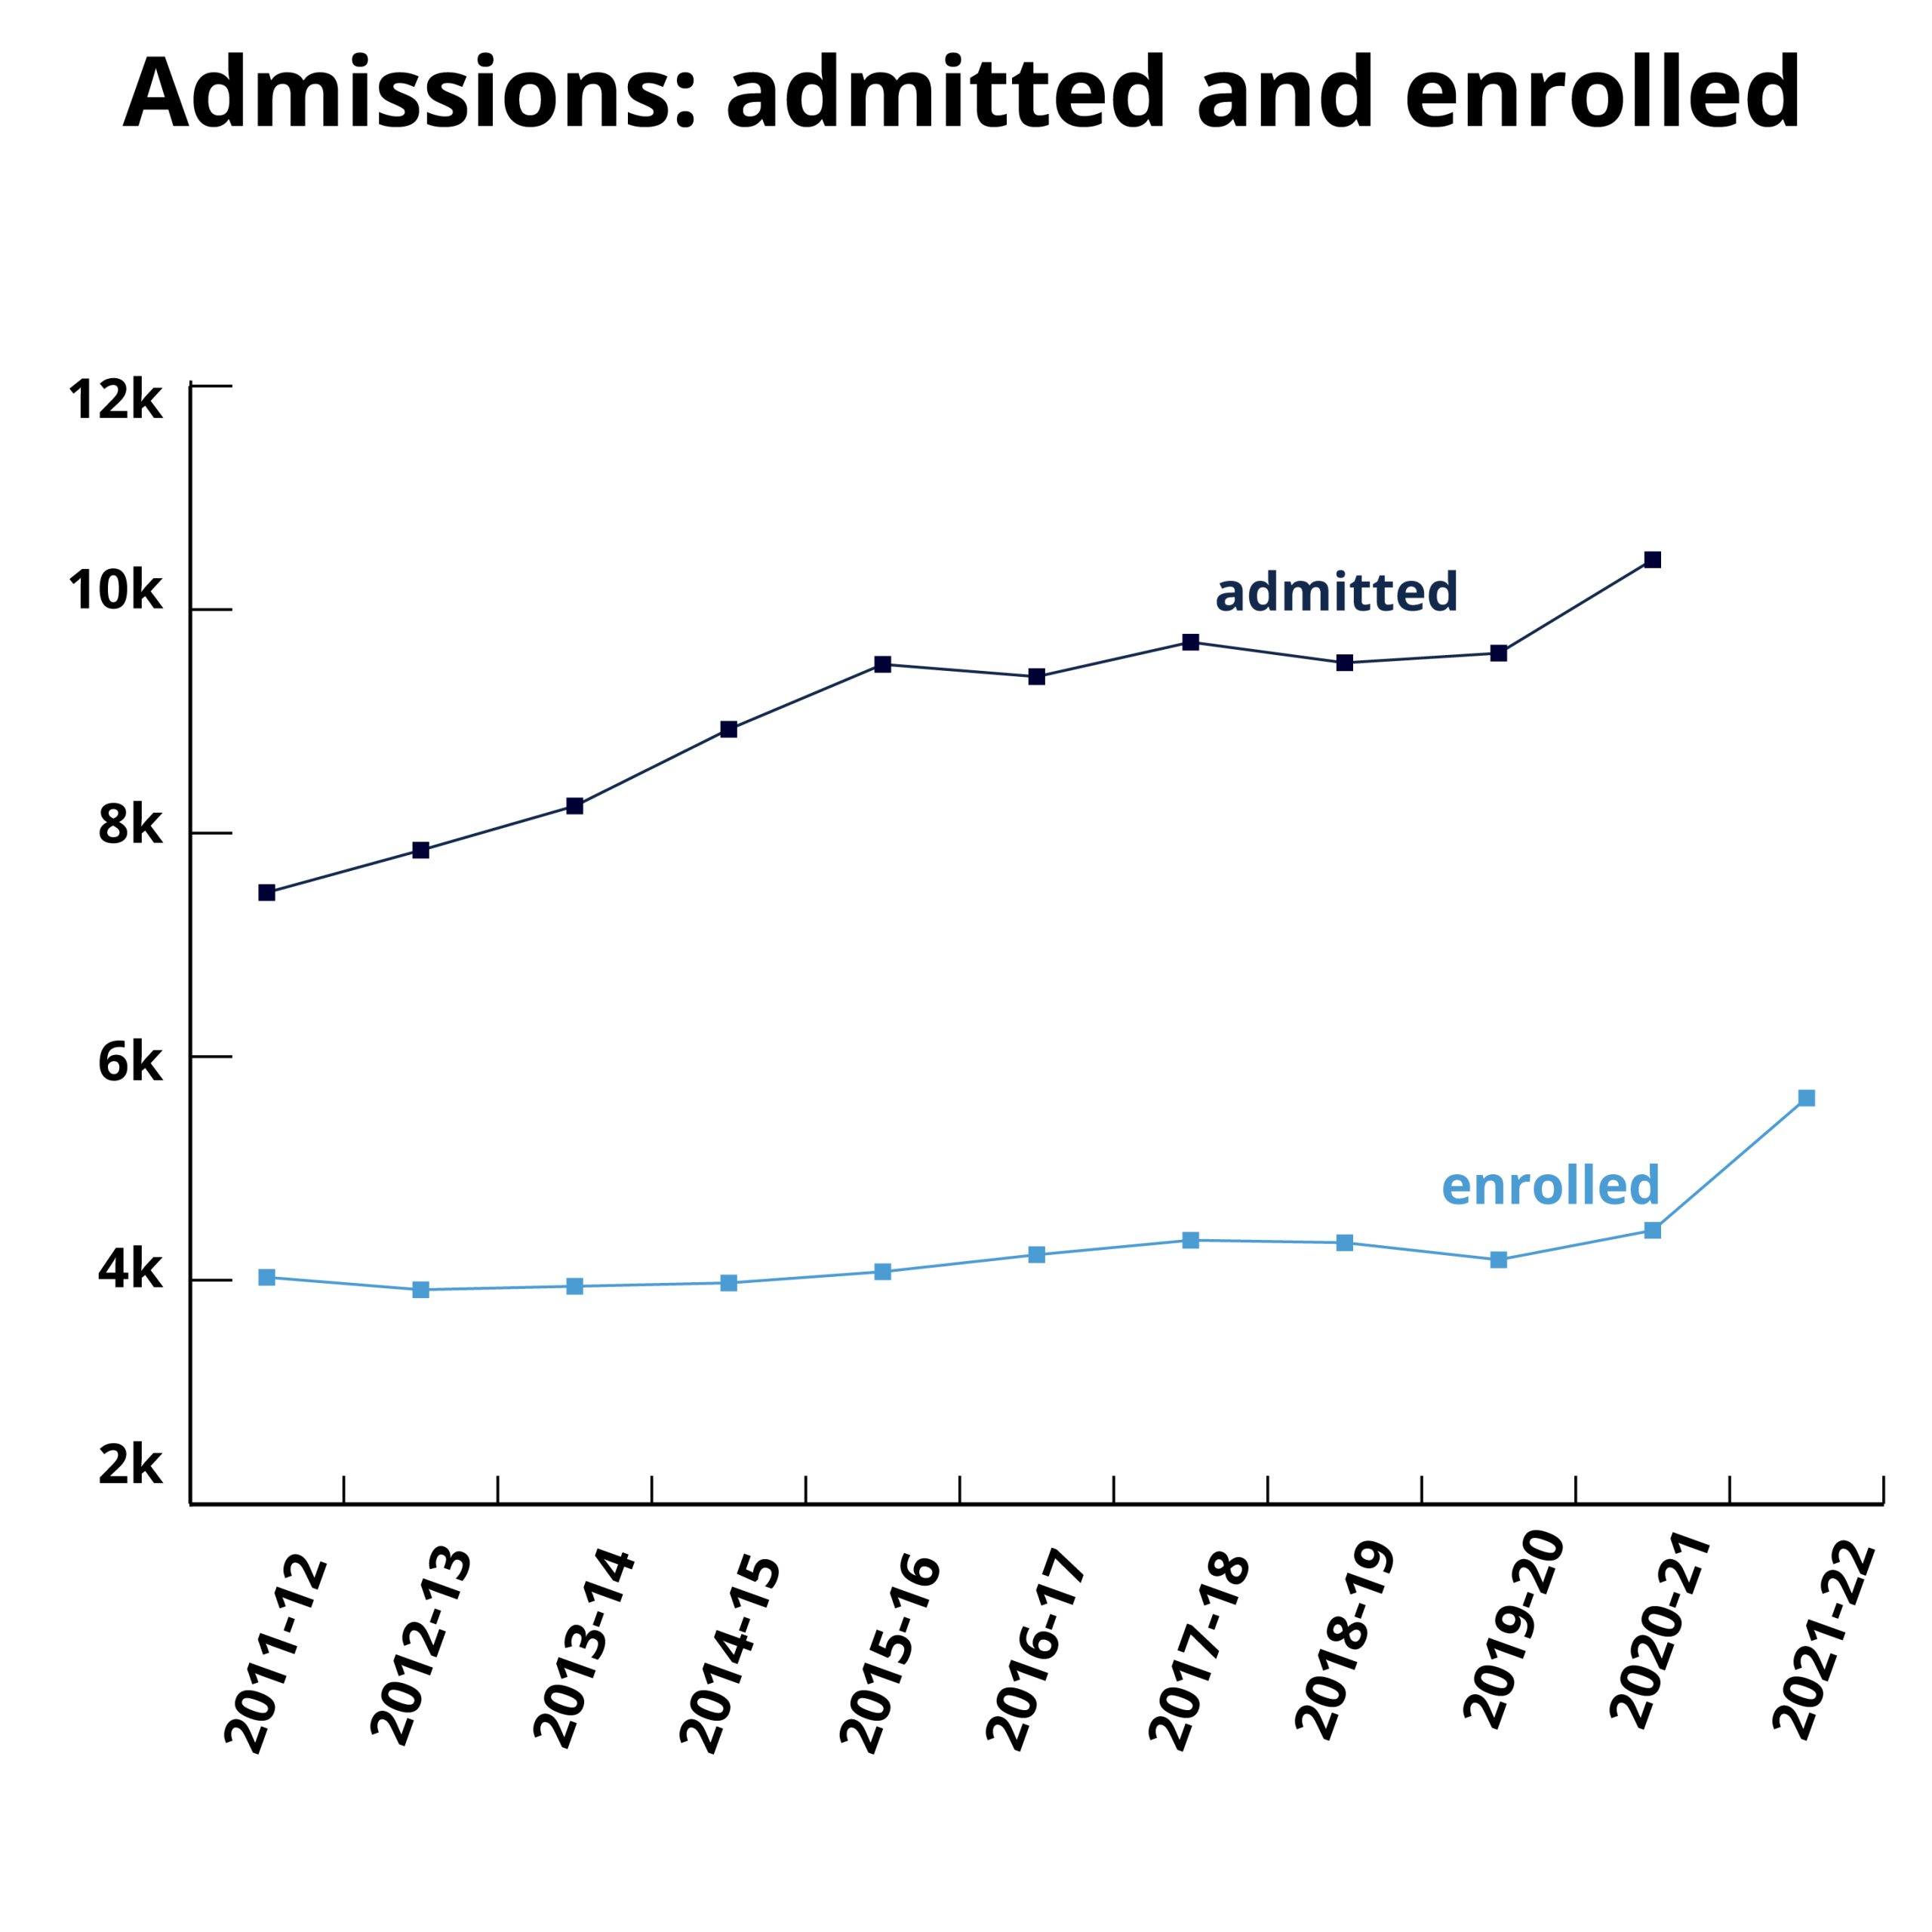 A graph charting two lines: students admitted and enrolled at Carolina over an 11 year period. The number of admitted students rose gradually from around 7,500 in 2011-2012 to around 10,500 in 2020-2021. The number enrolled remained around 4,000 fromo 2011-2012 to 2019-2020 but then rose to 6,000 in 2021-2022.